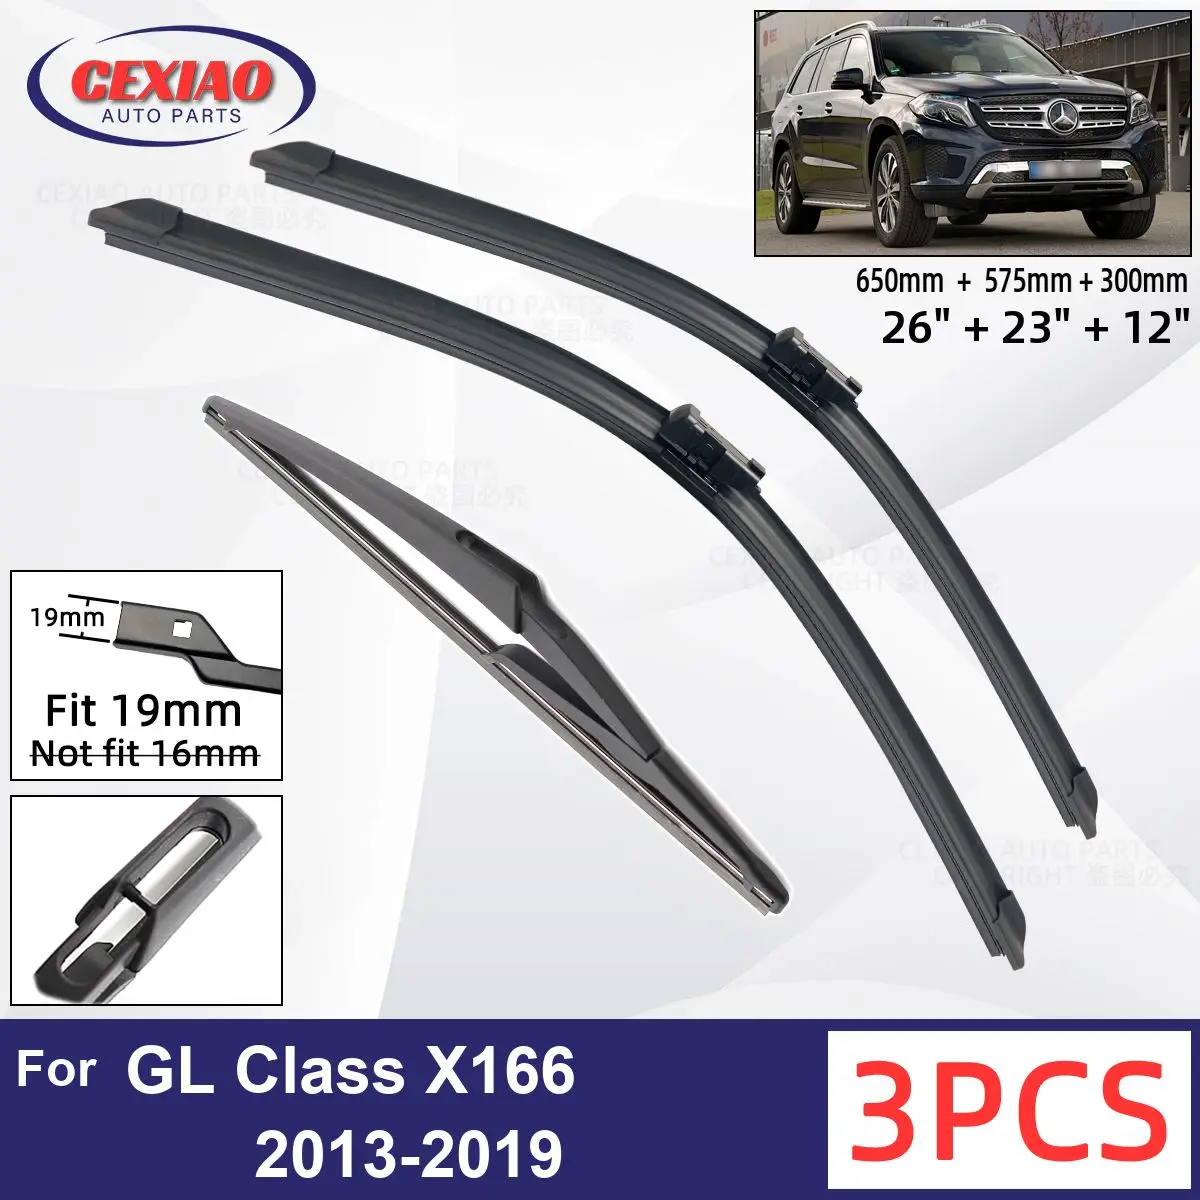 For Benz GL Class X166 2013-2019 Car Front Rear Wiper Blades Soft Rubber Windscreen Wipers Auto Windshield 26"+23"+12" 2017 2018